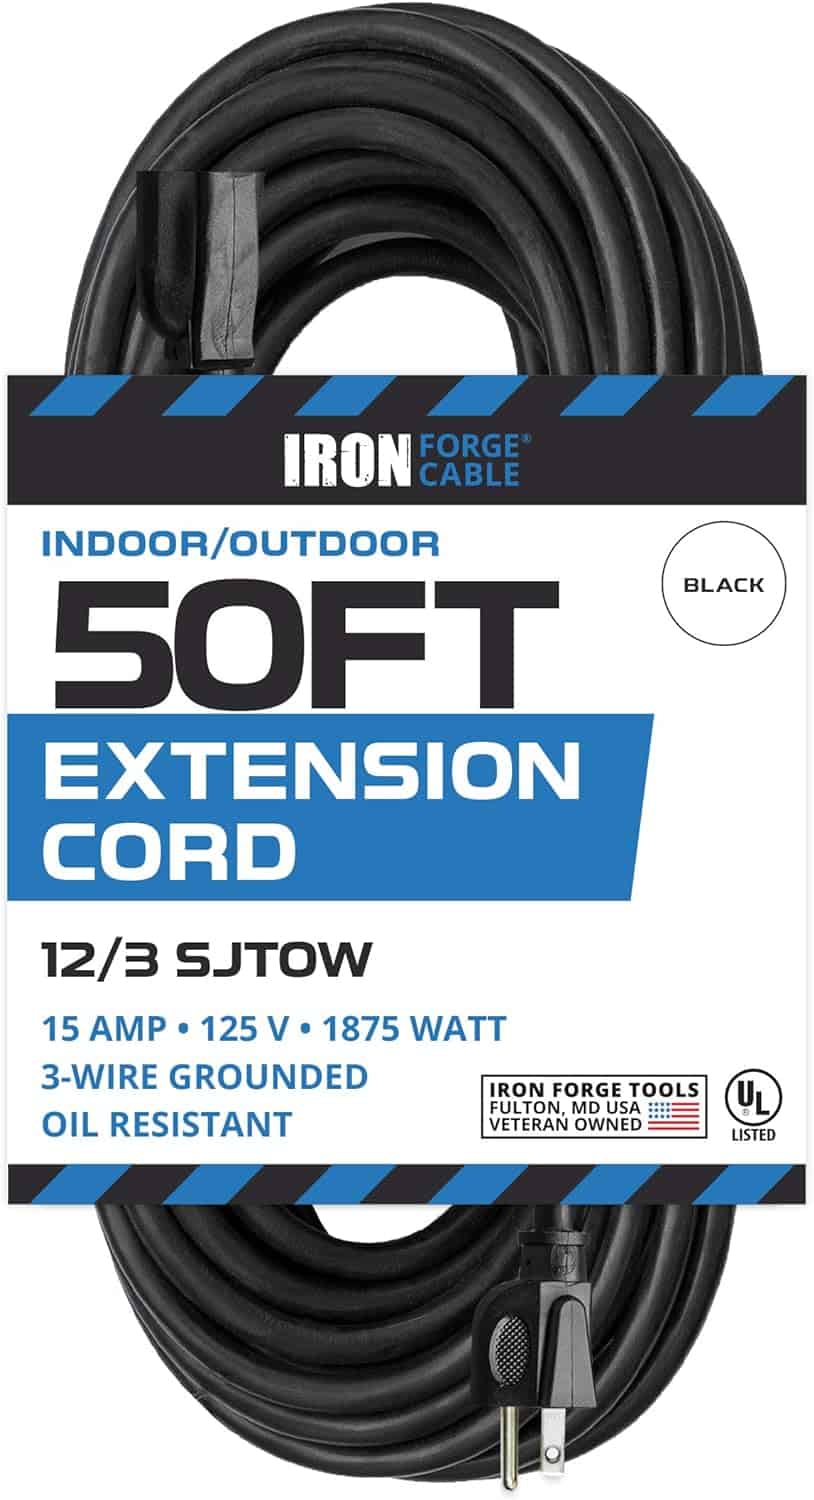 Iron Forge Cable Black Extension Cord 50 Ft Oil Resistant for Farms and Ranches – 12 3 SJTOW Heavy Duty Outdoor Extension Cord with 3 Prong Plug for Safety, 15 AMP Power Cable for Heavy Appliances 1